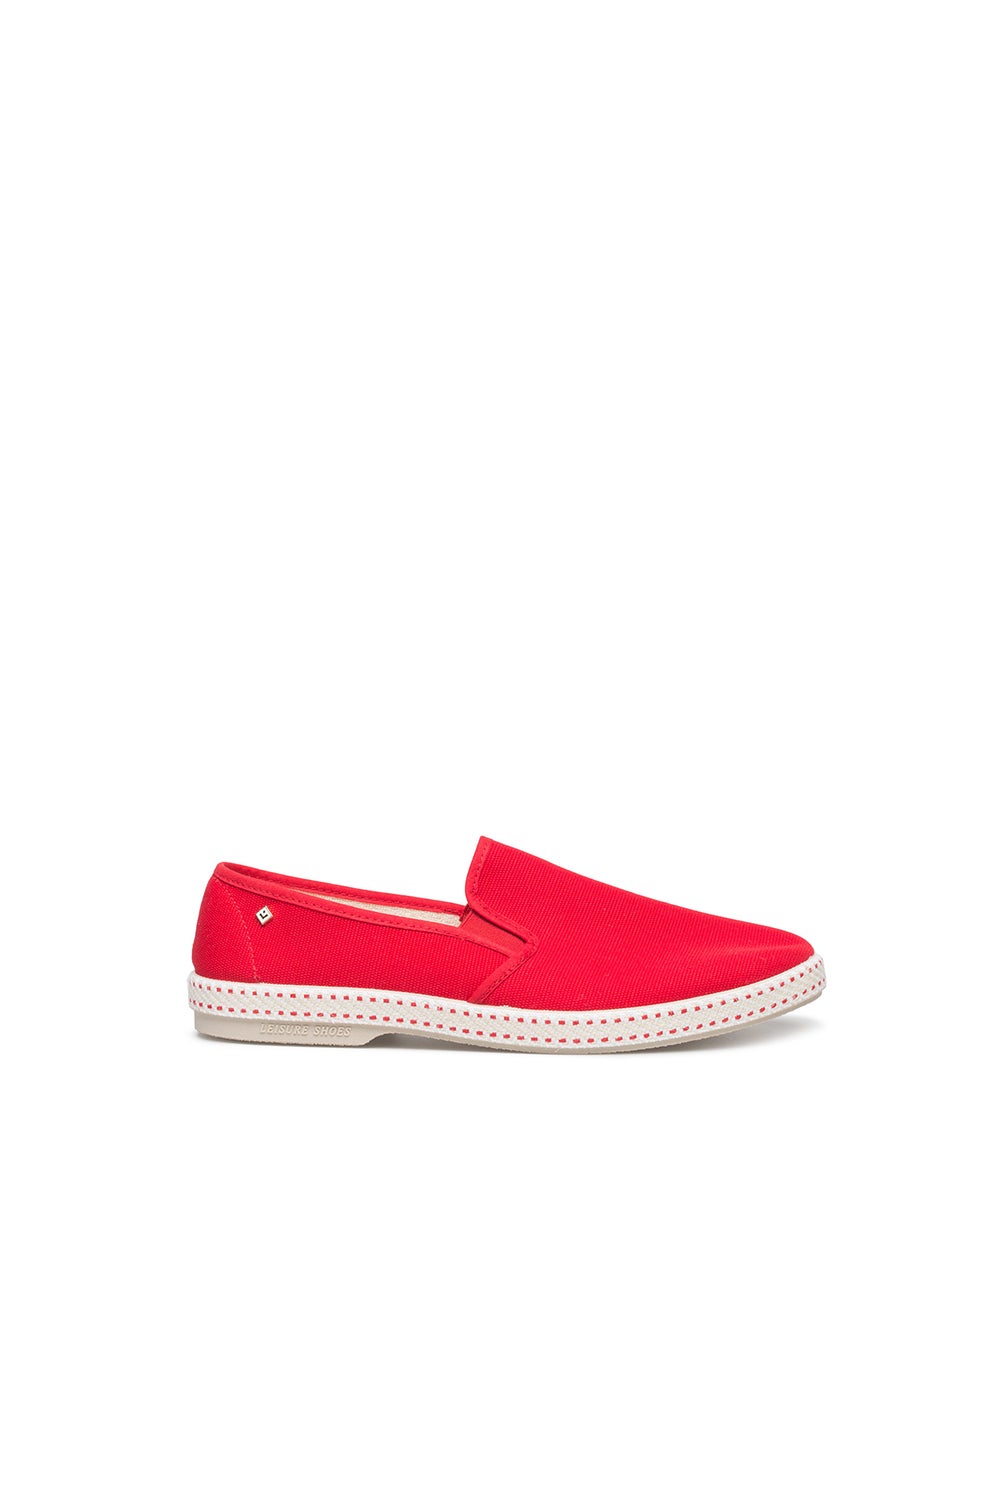 Rivieras Classic 10o Rouge